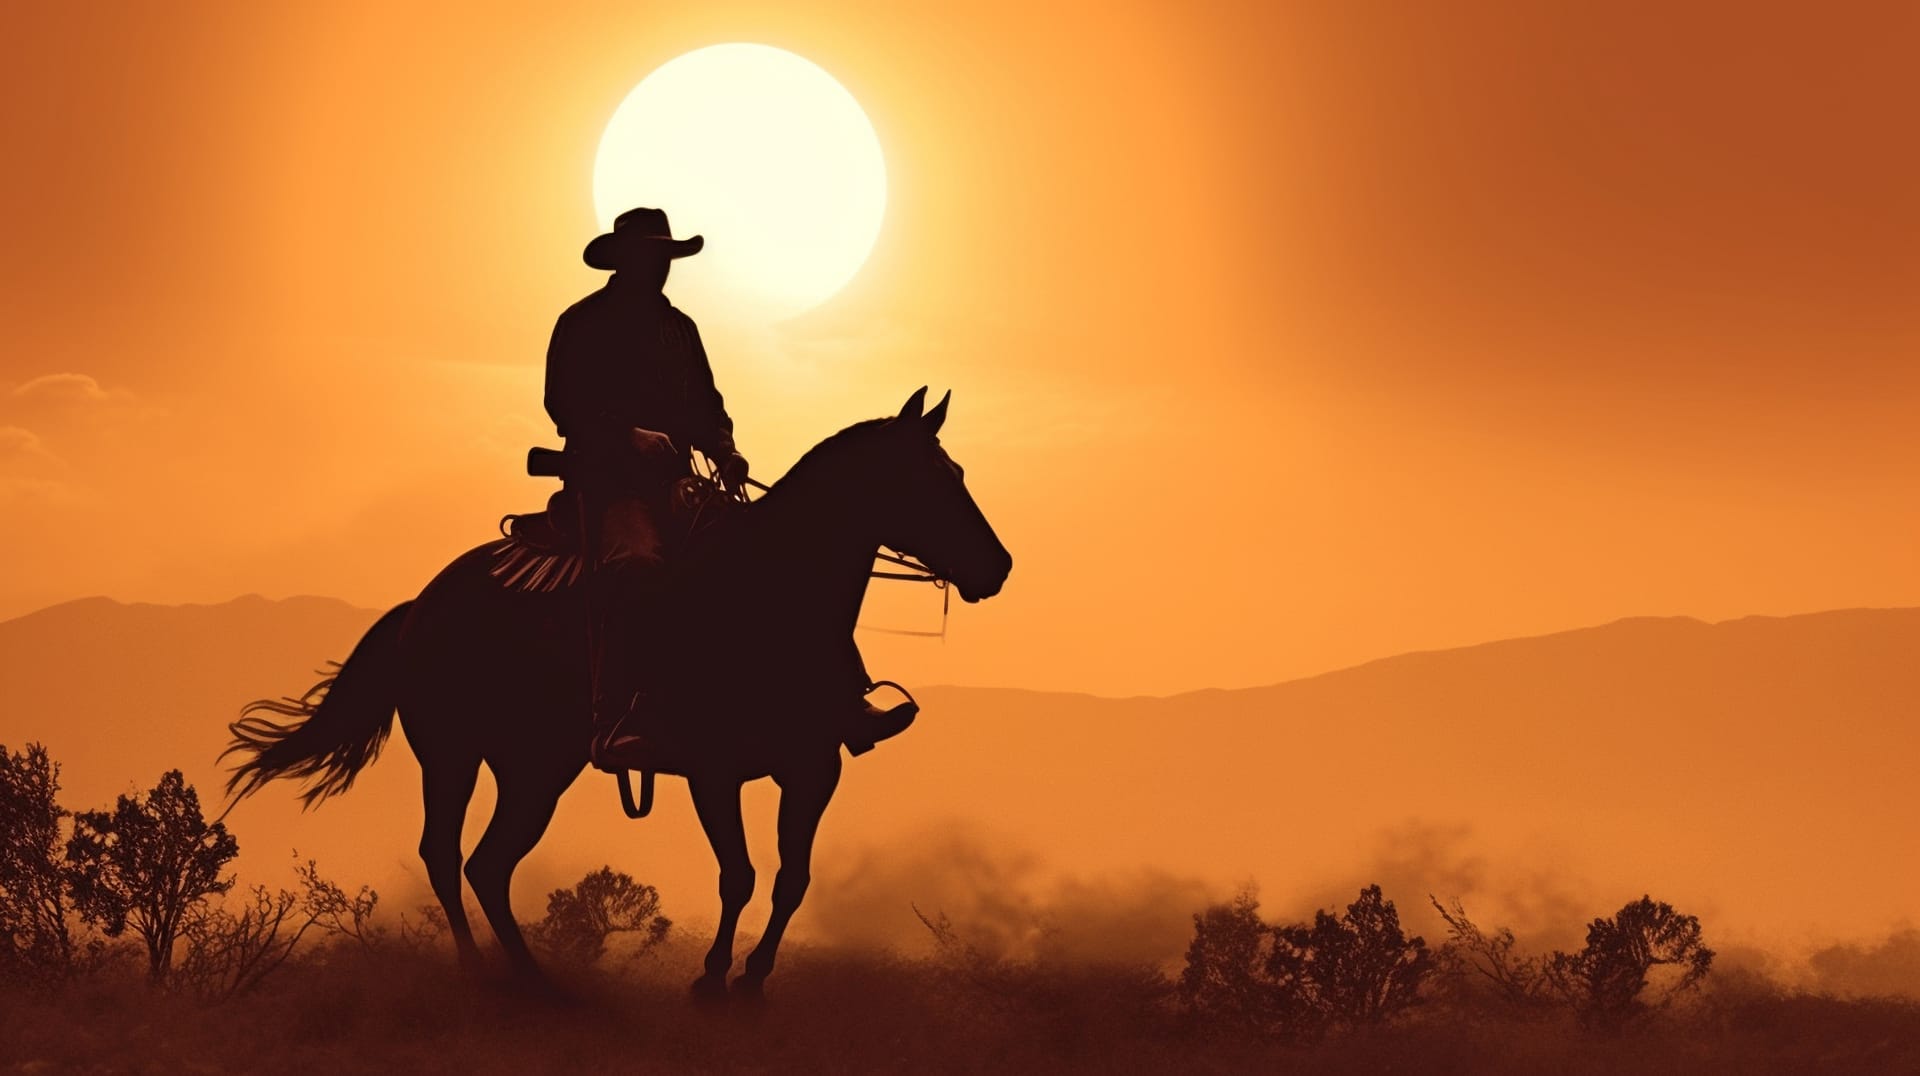 Riding horse silhouetted against sunset cowboy horse rising up